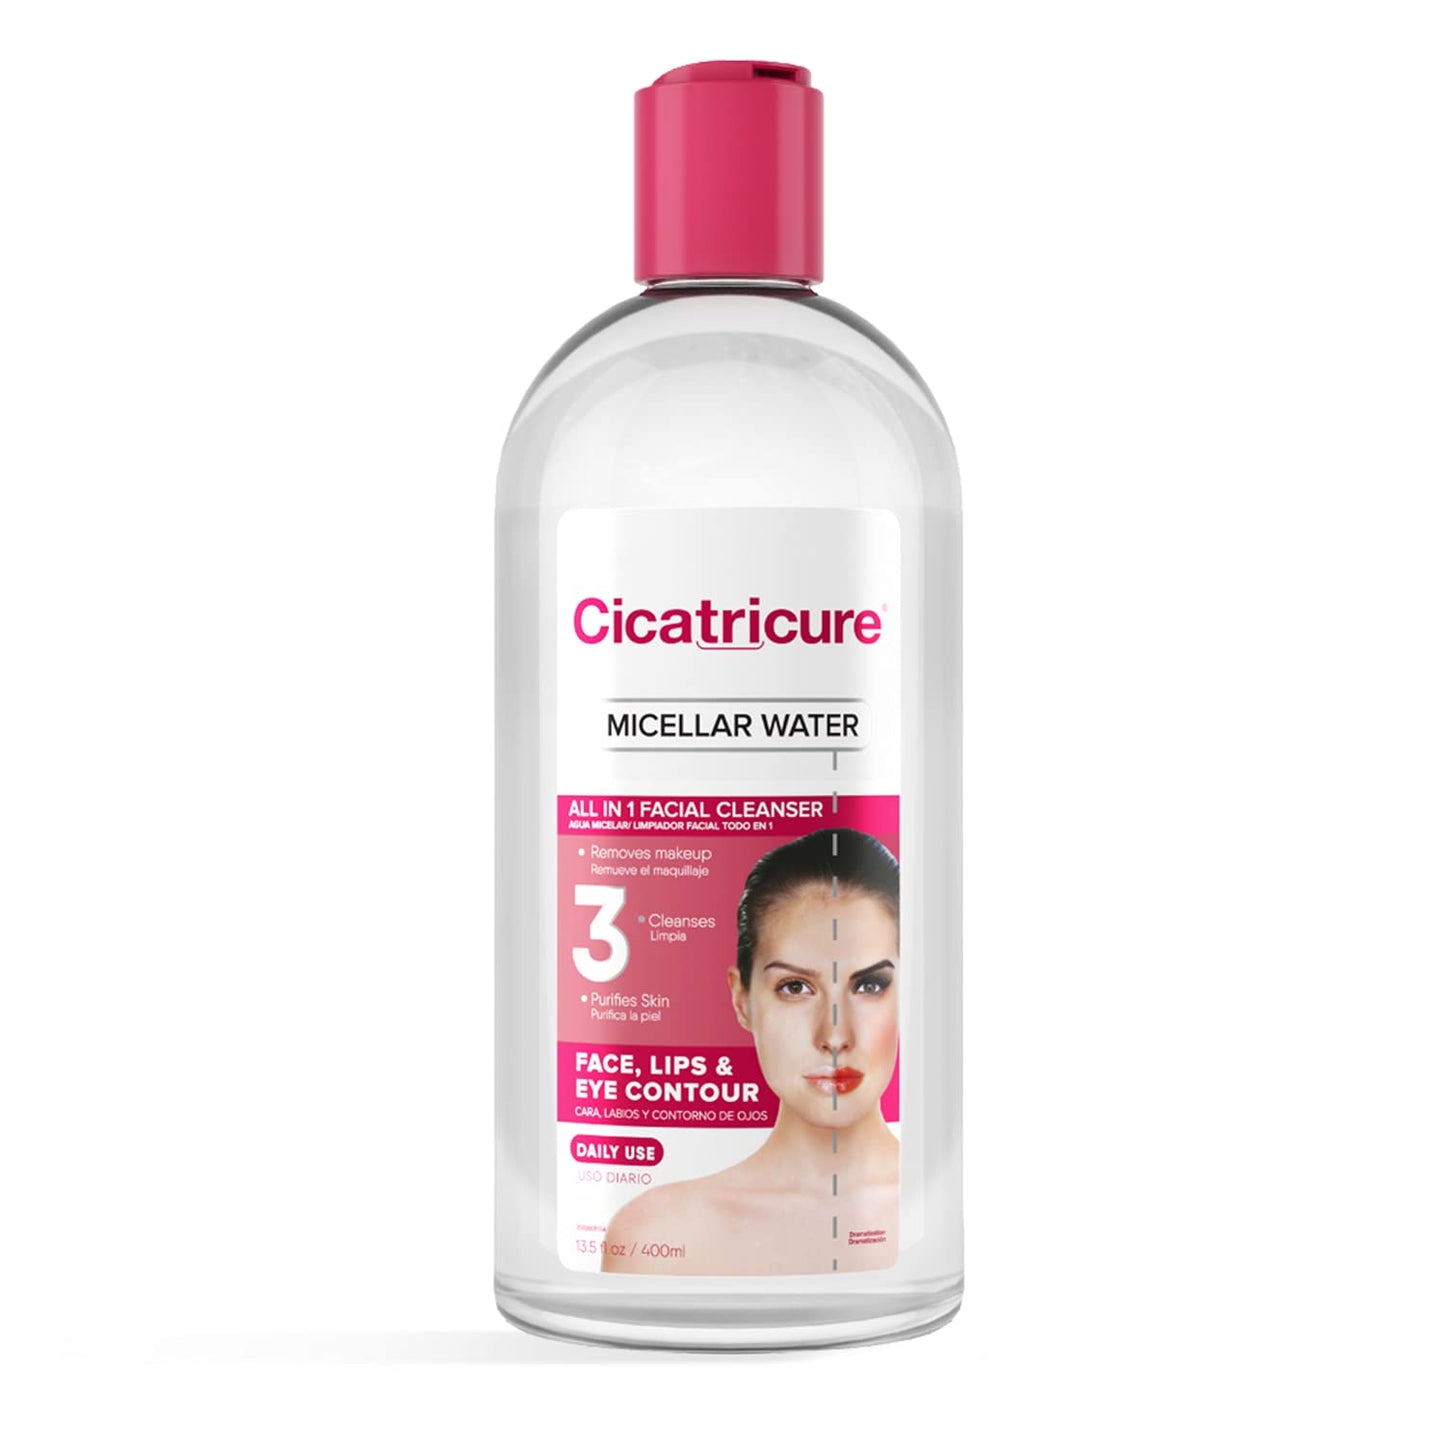 CICATRICURE-Micellar-Water-Facial-Cleanser,-336